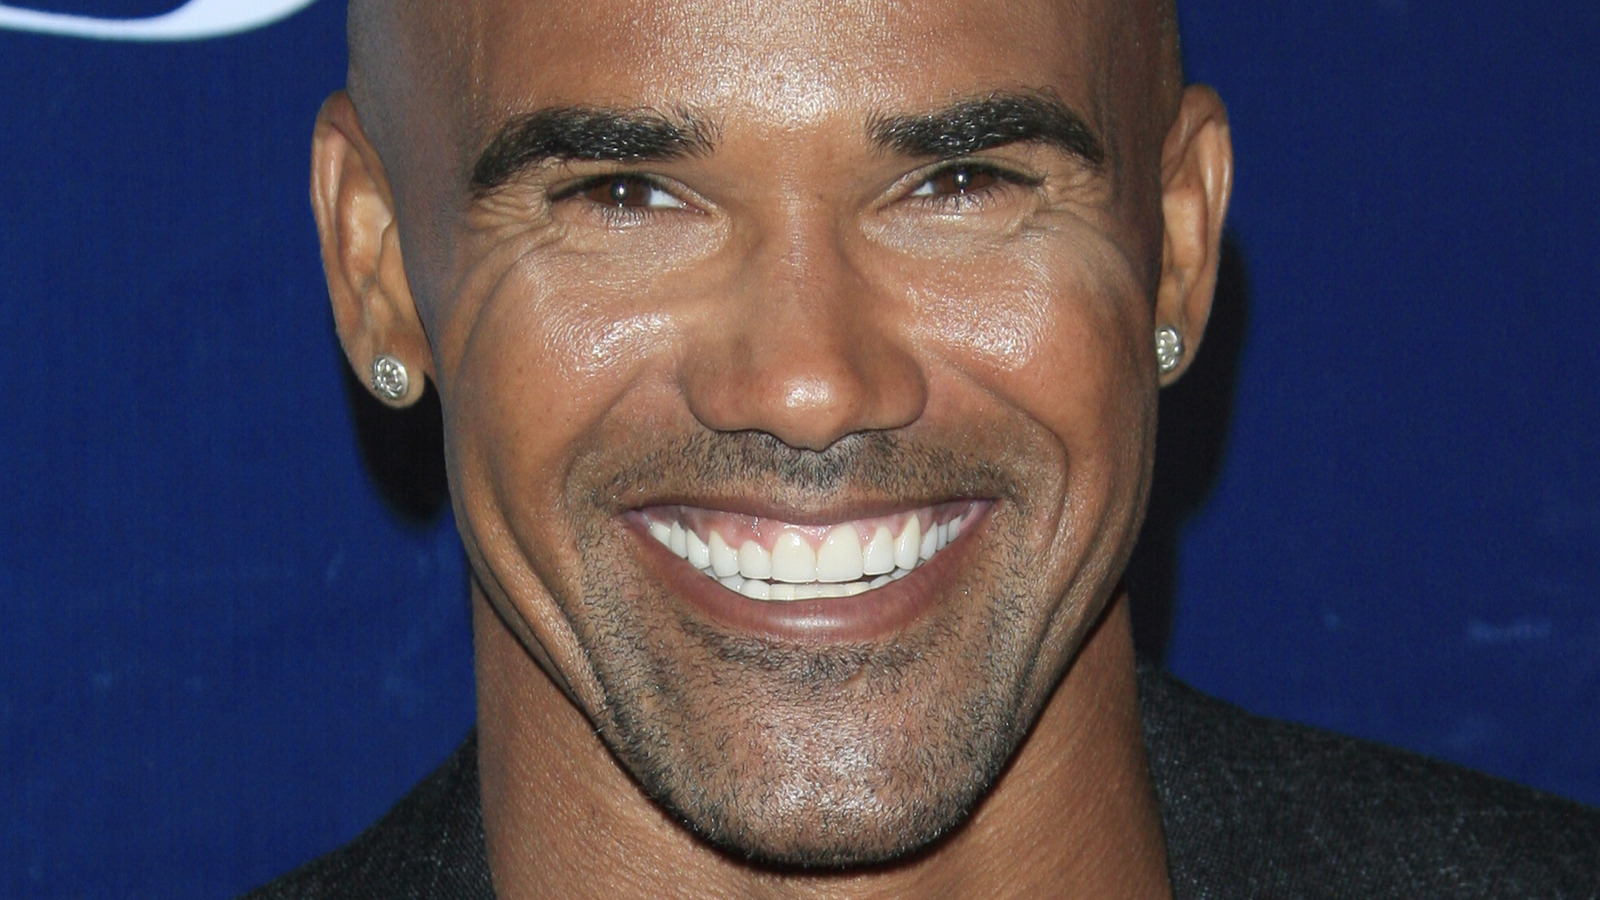 "Criminal Minds" actor Shemar Moore experienced bullying ...